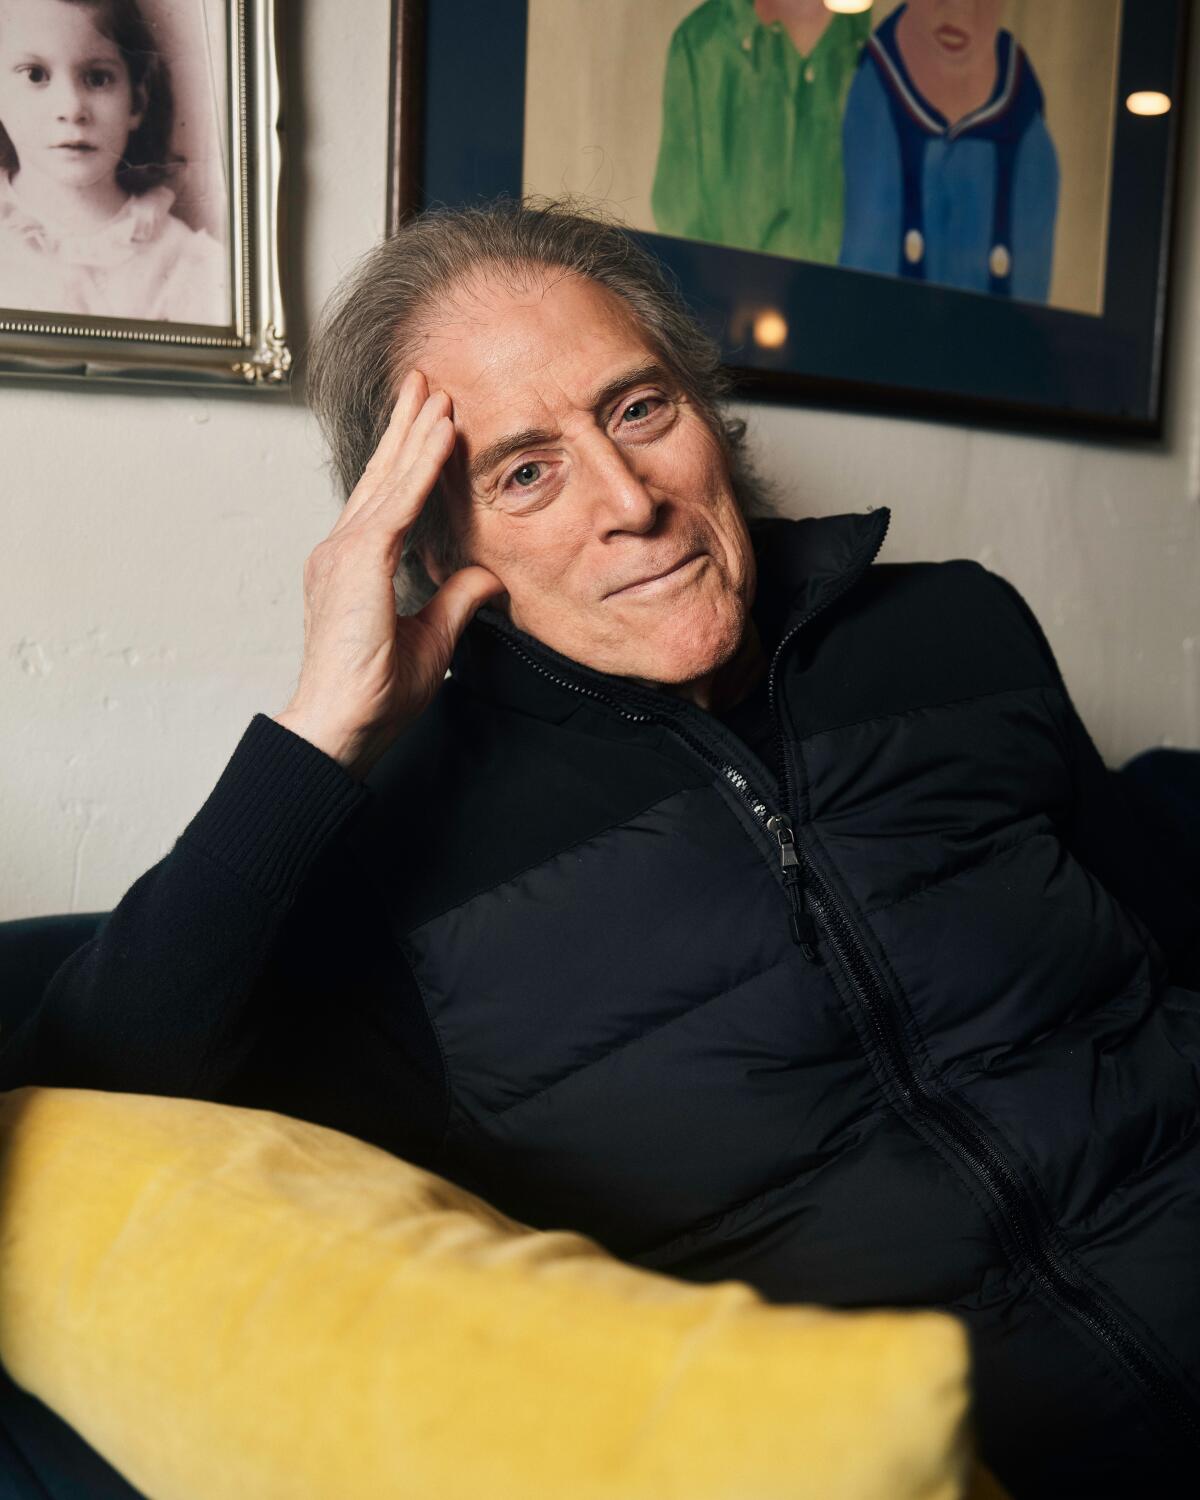 Richard Lewis sits in a yellow chair with his head resting on his hand